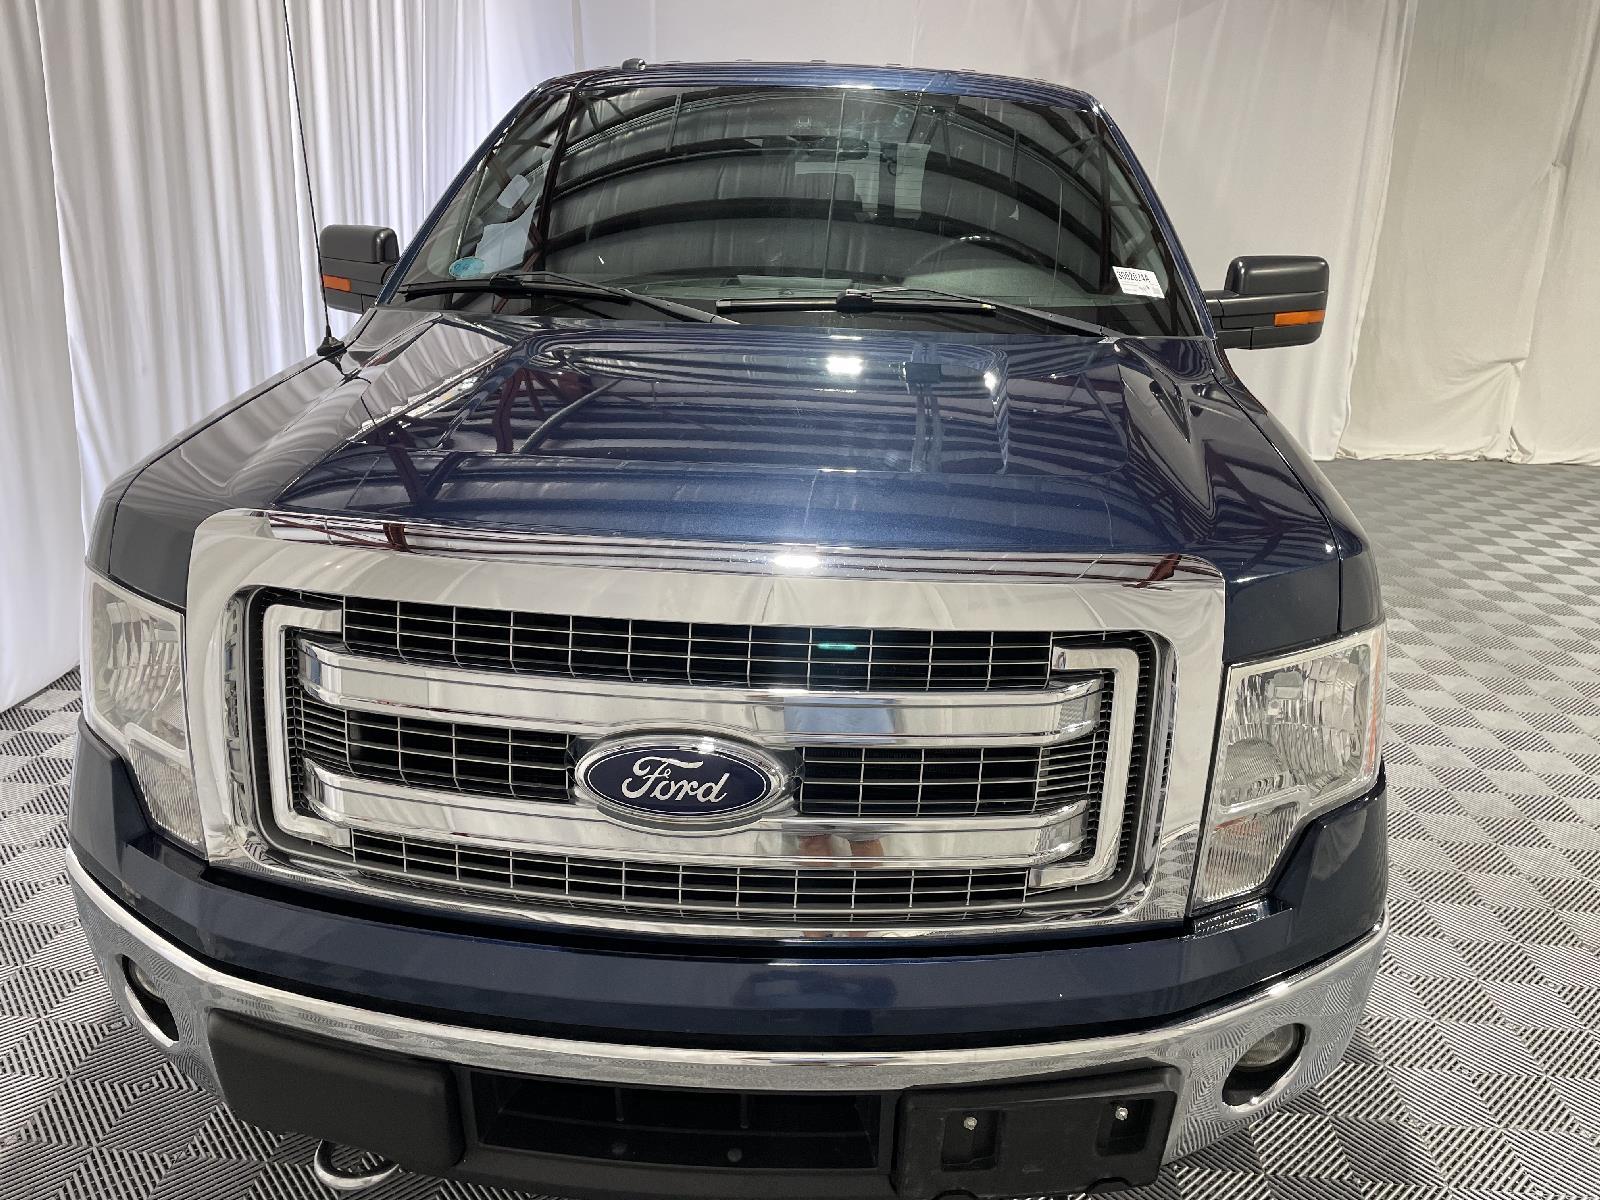 Used 2014 Ford F-150 XLT Crew Cab Truck for sale in St Joseph MO